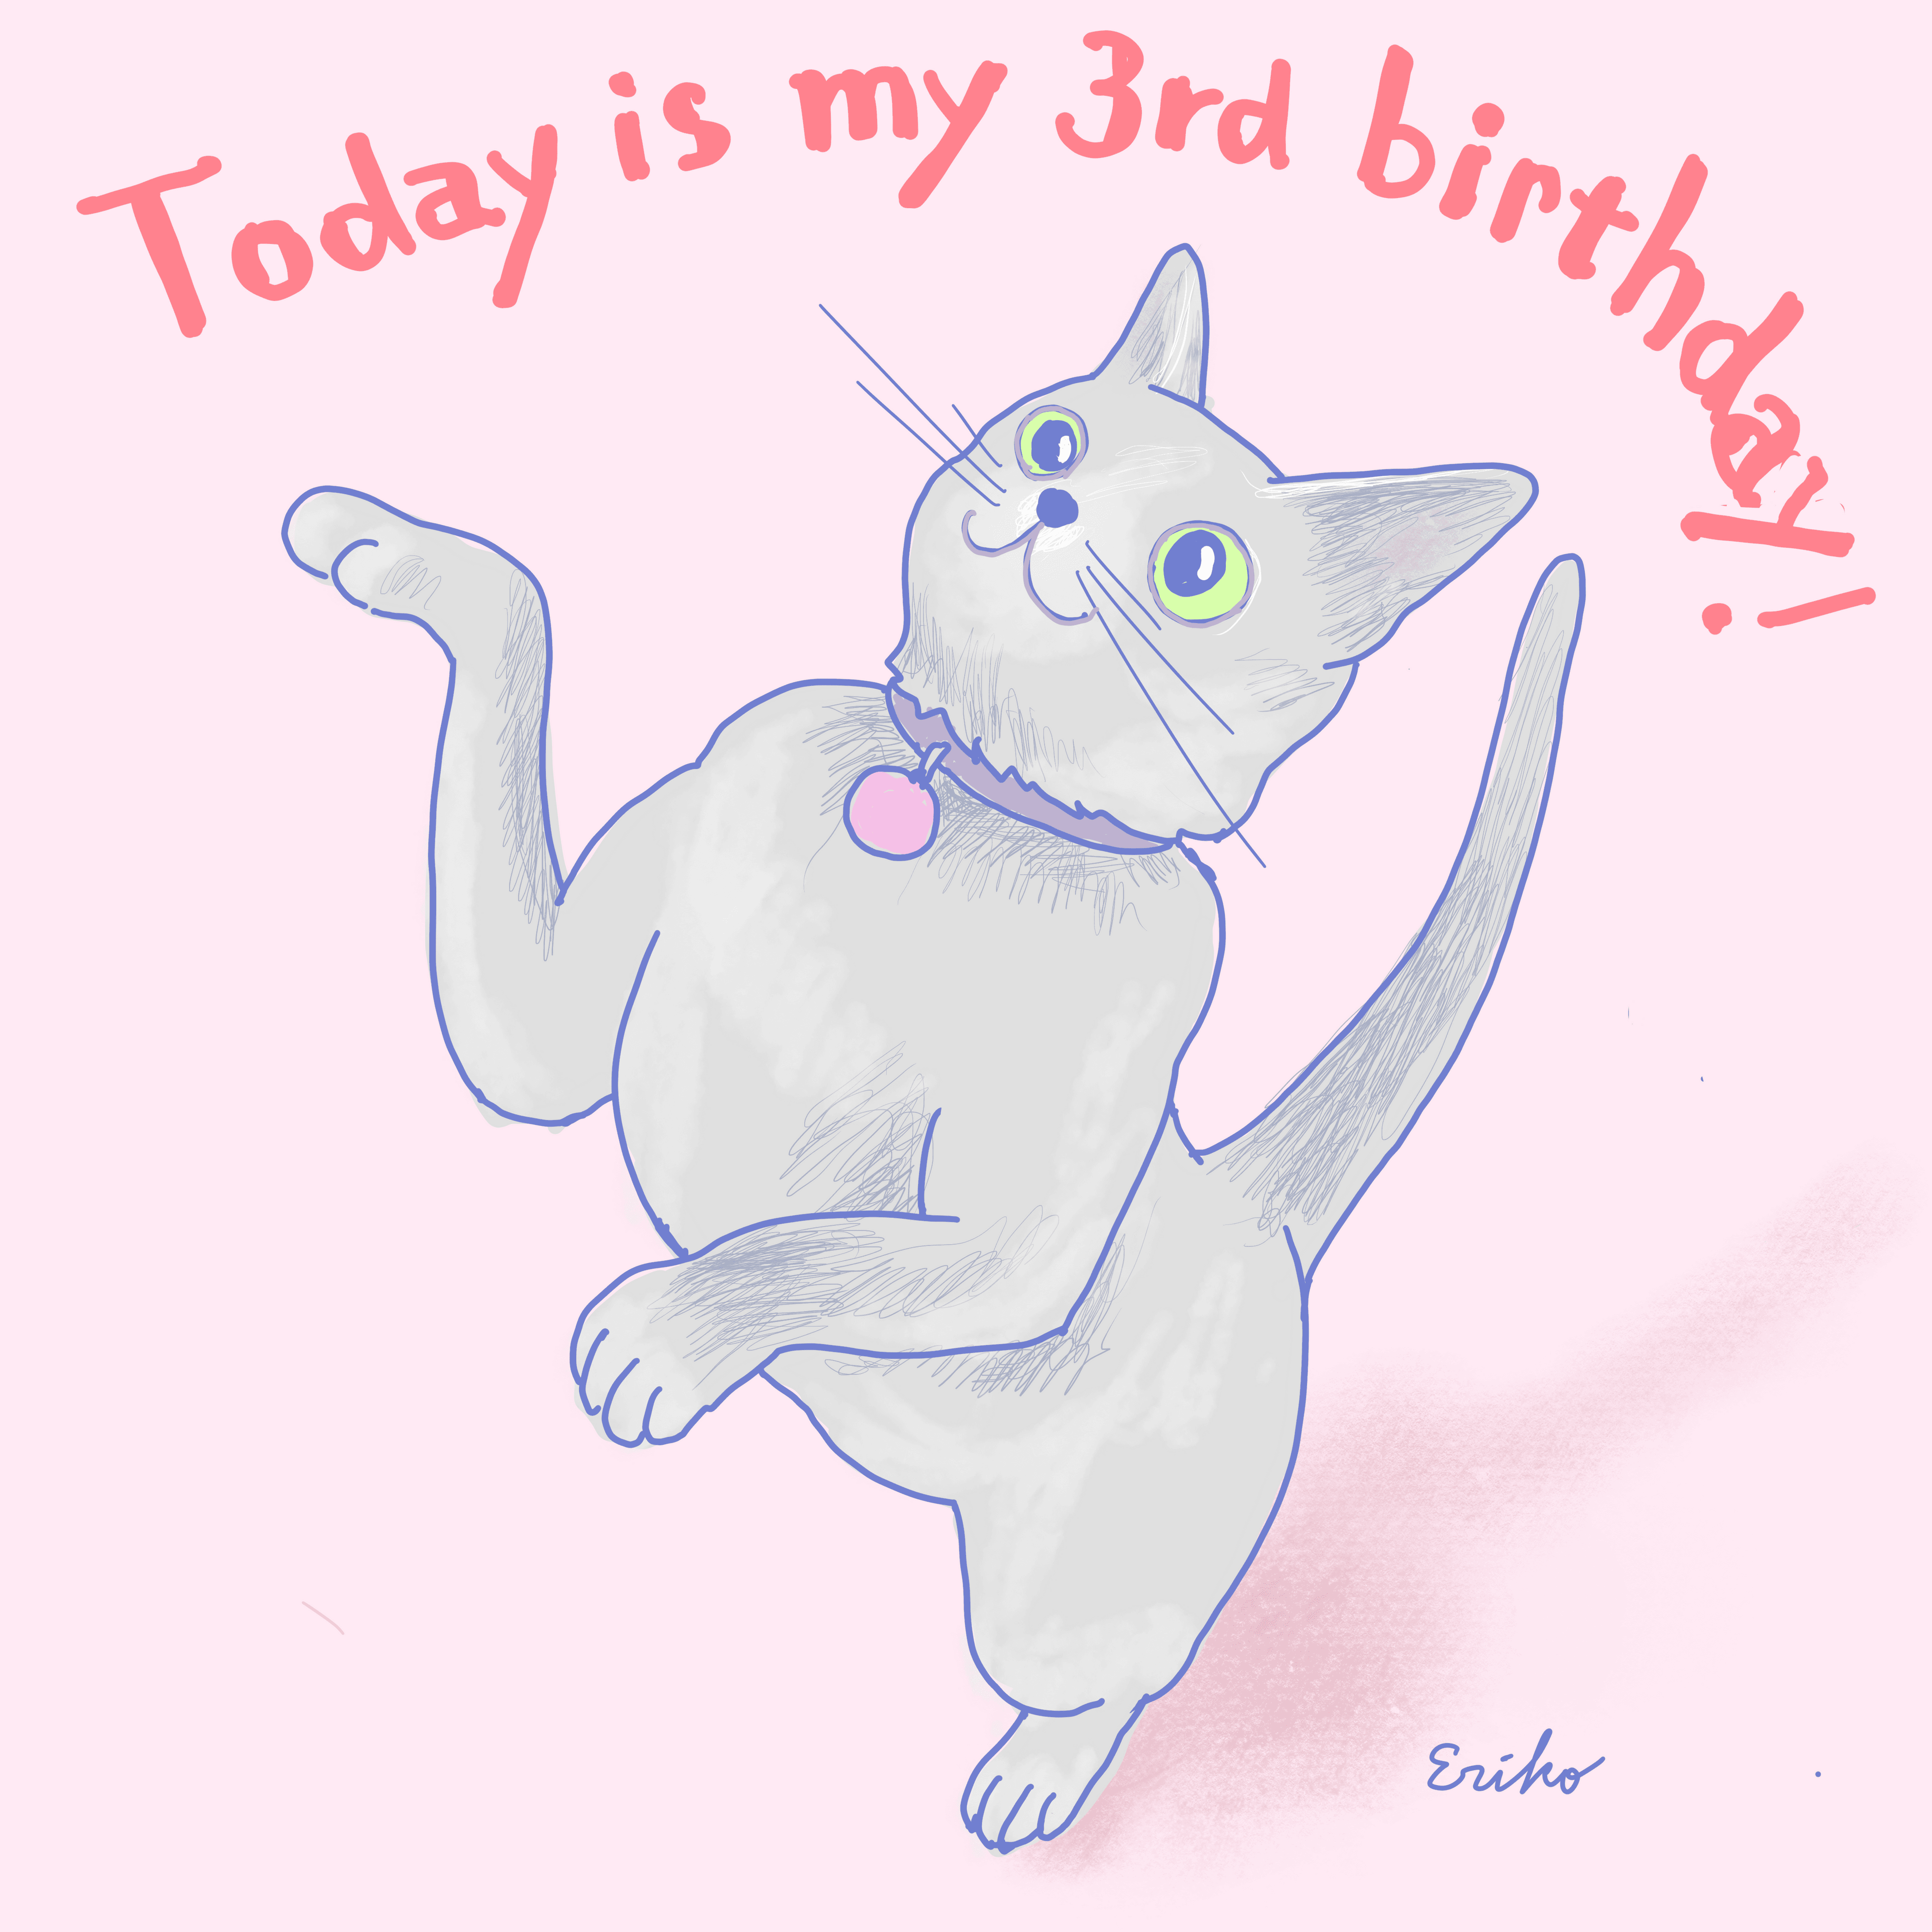 Tiens Cat #0023 - Today is my 3rd birthday!